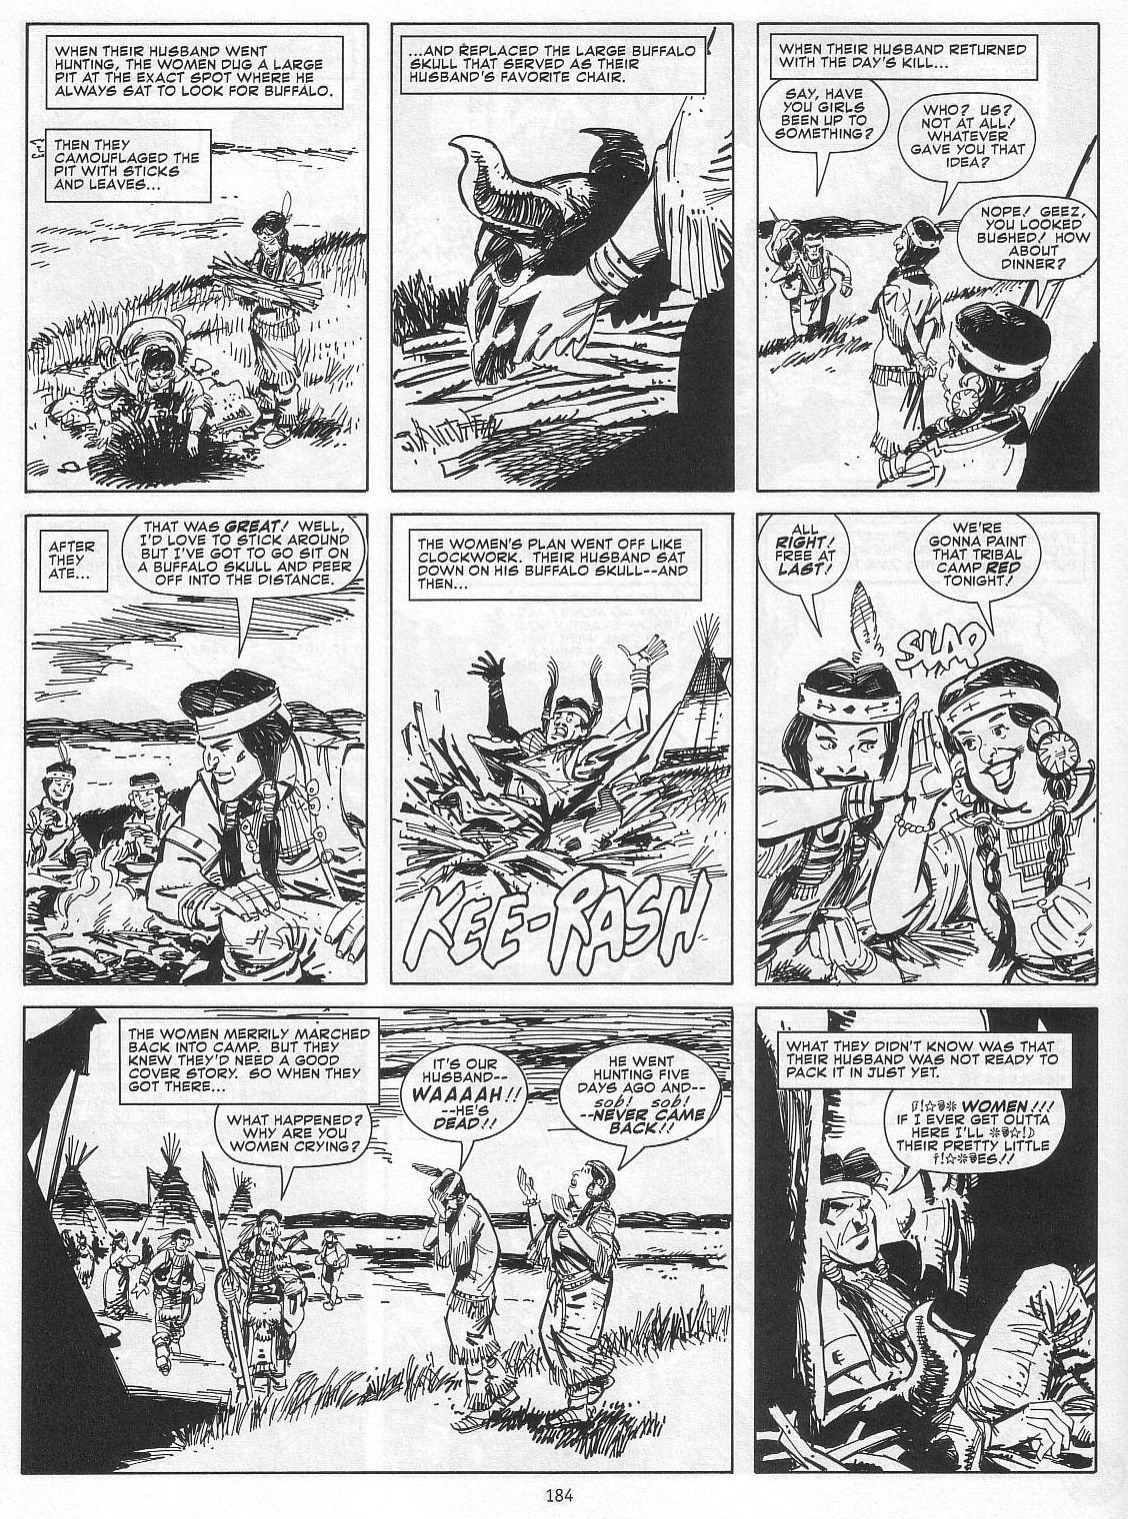 Read online The Big Book of... comic -  Issue # TPB The Weird Wild West - 184